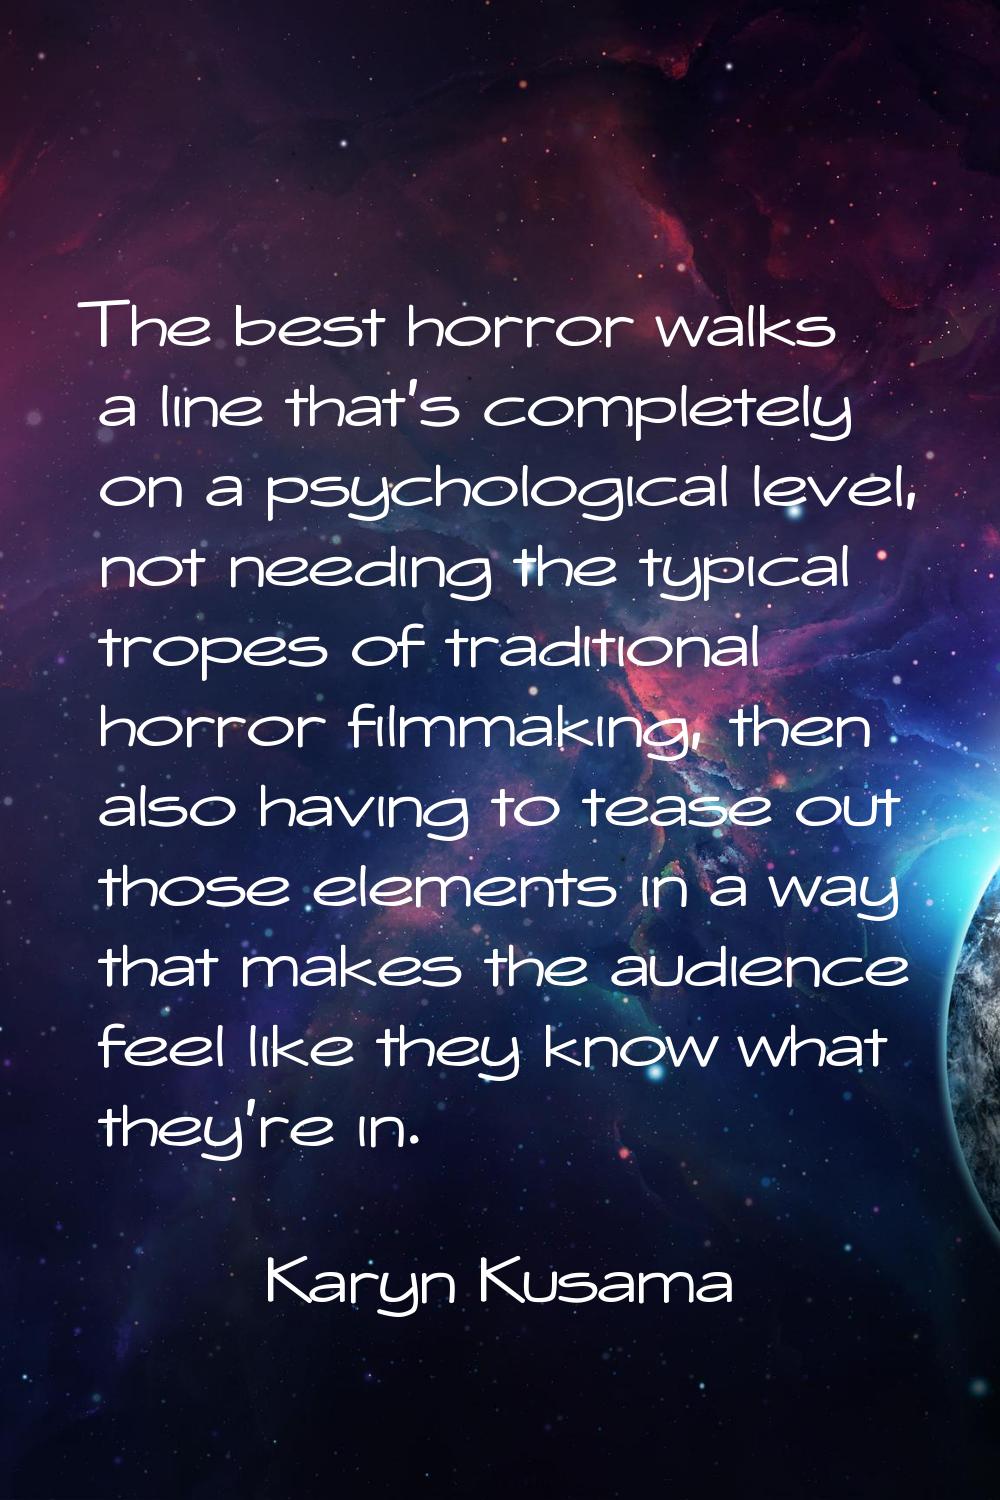 The best horror walks a line that's completely on a psychological level, not needing the typical tr